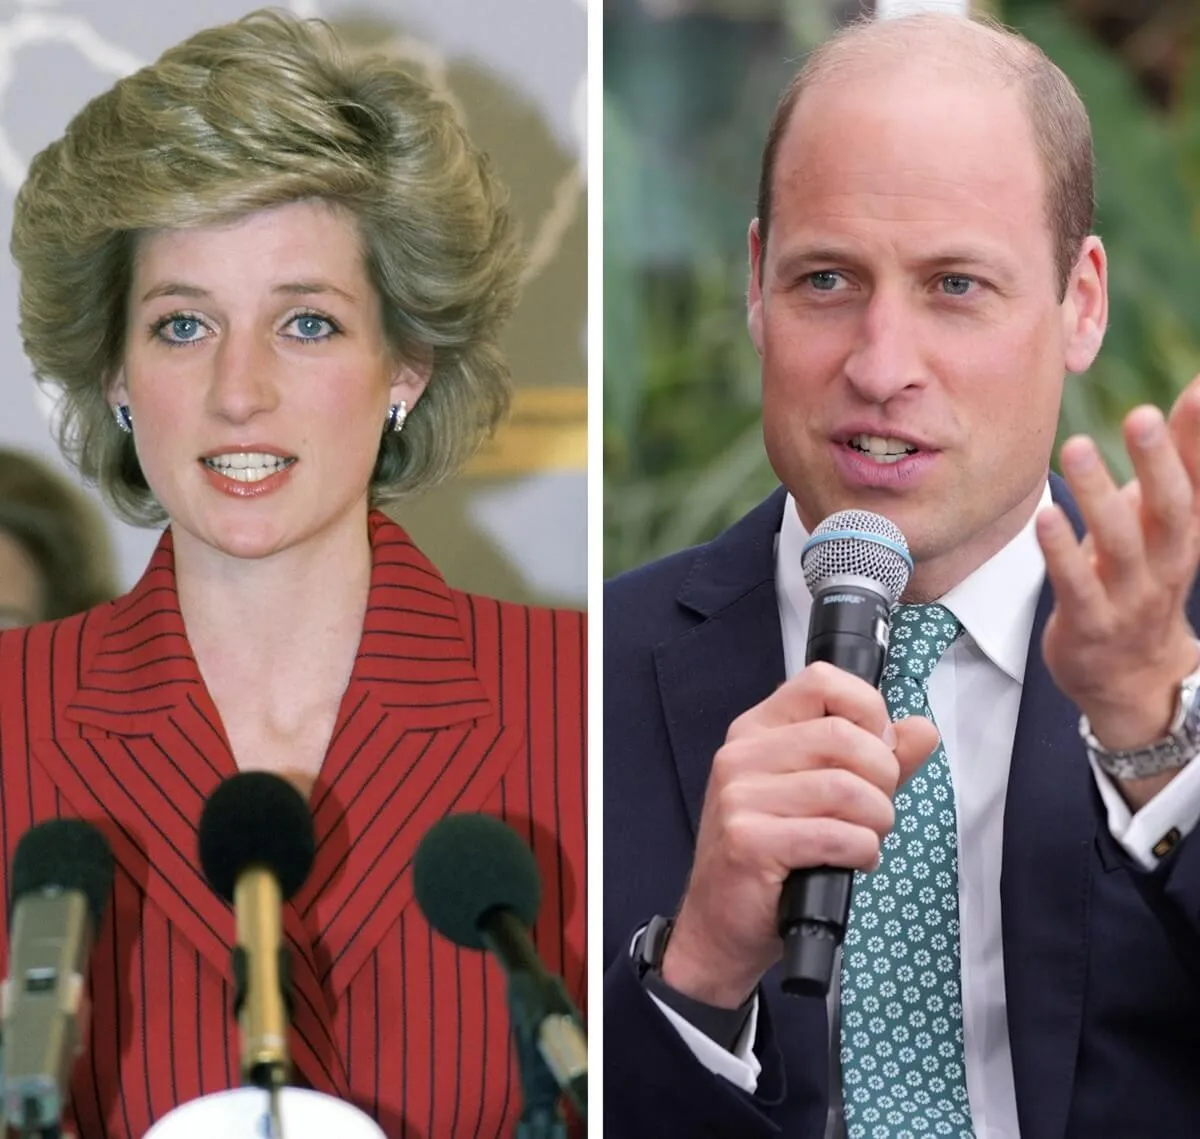 (L) Princess Diana, patron of 'Help the Aged' giving a speech, (R) Prince William giving a speech at Earthshot Innovation Camp